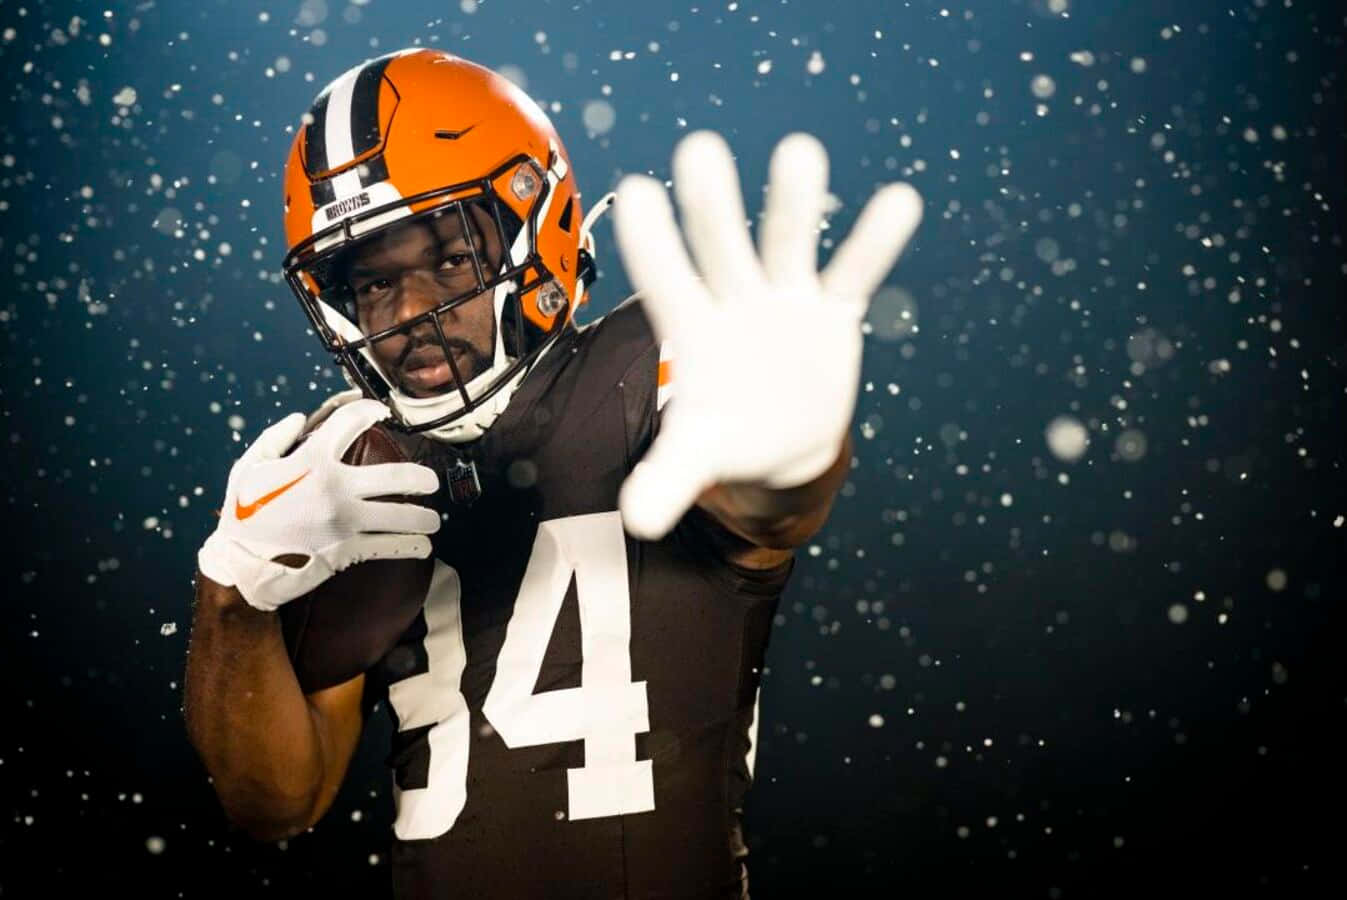 Football_ Player_ Number_34_ Snowflakes_ Background Wallpaper